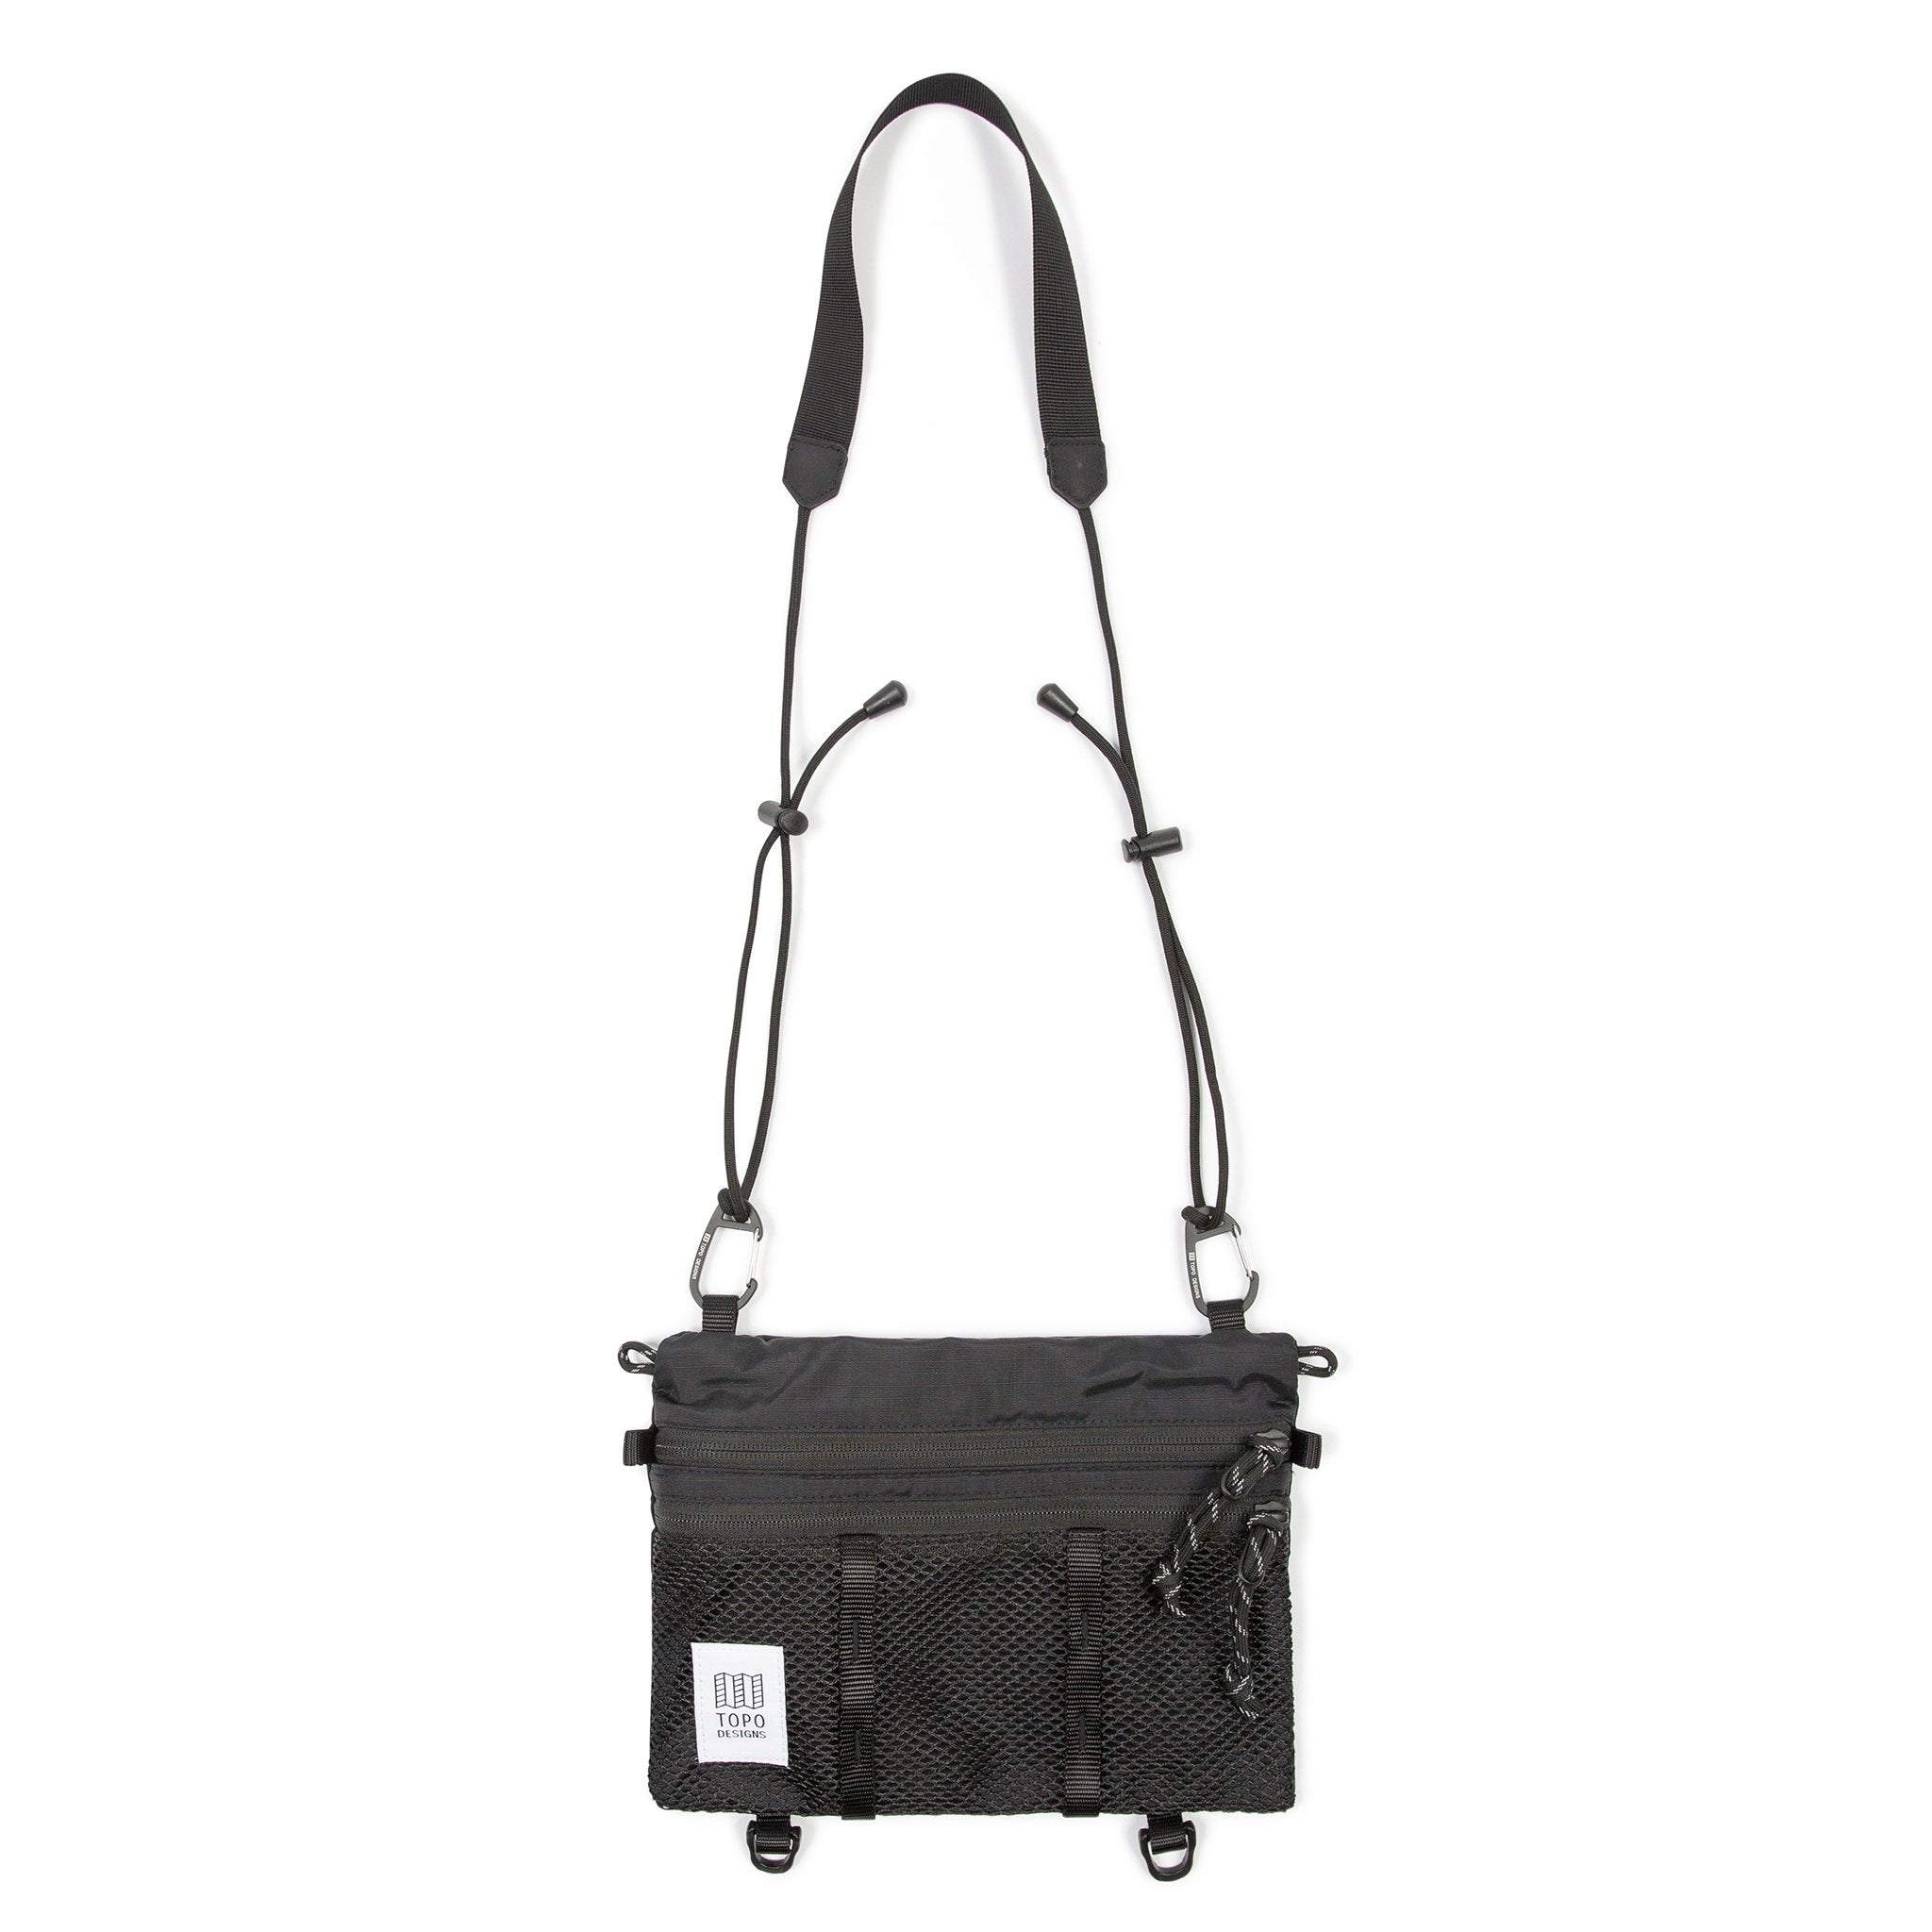 Topo Designs Mountain Accessory crossbody Shoulder Bag in "Black" lightweight recycled nylon.